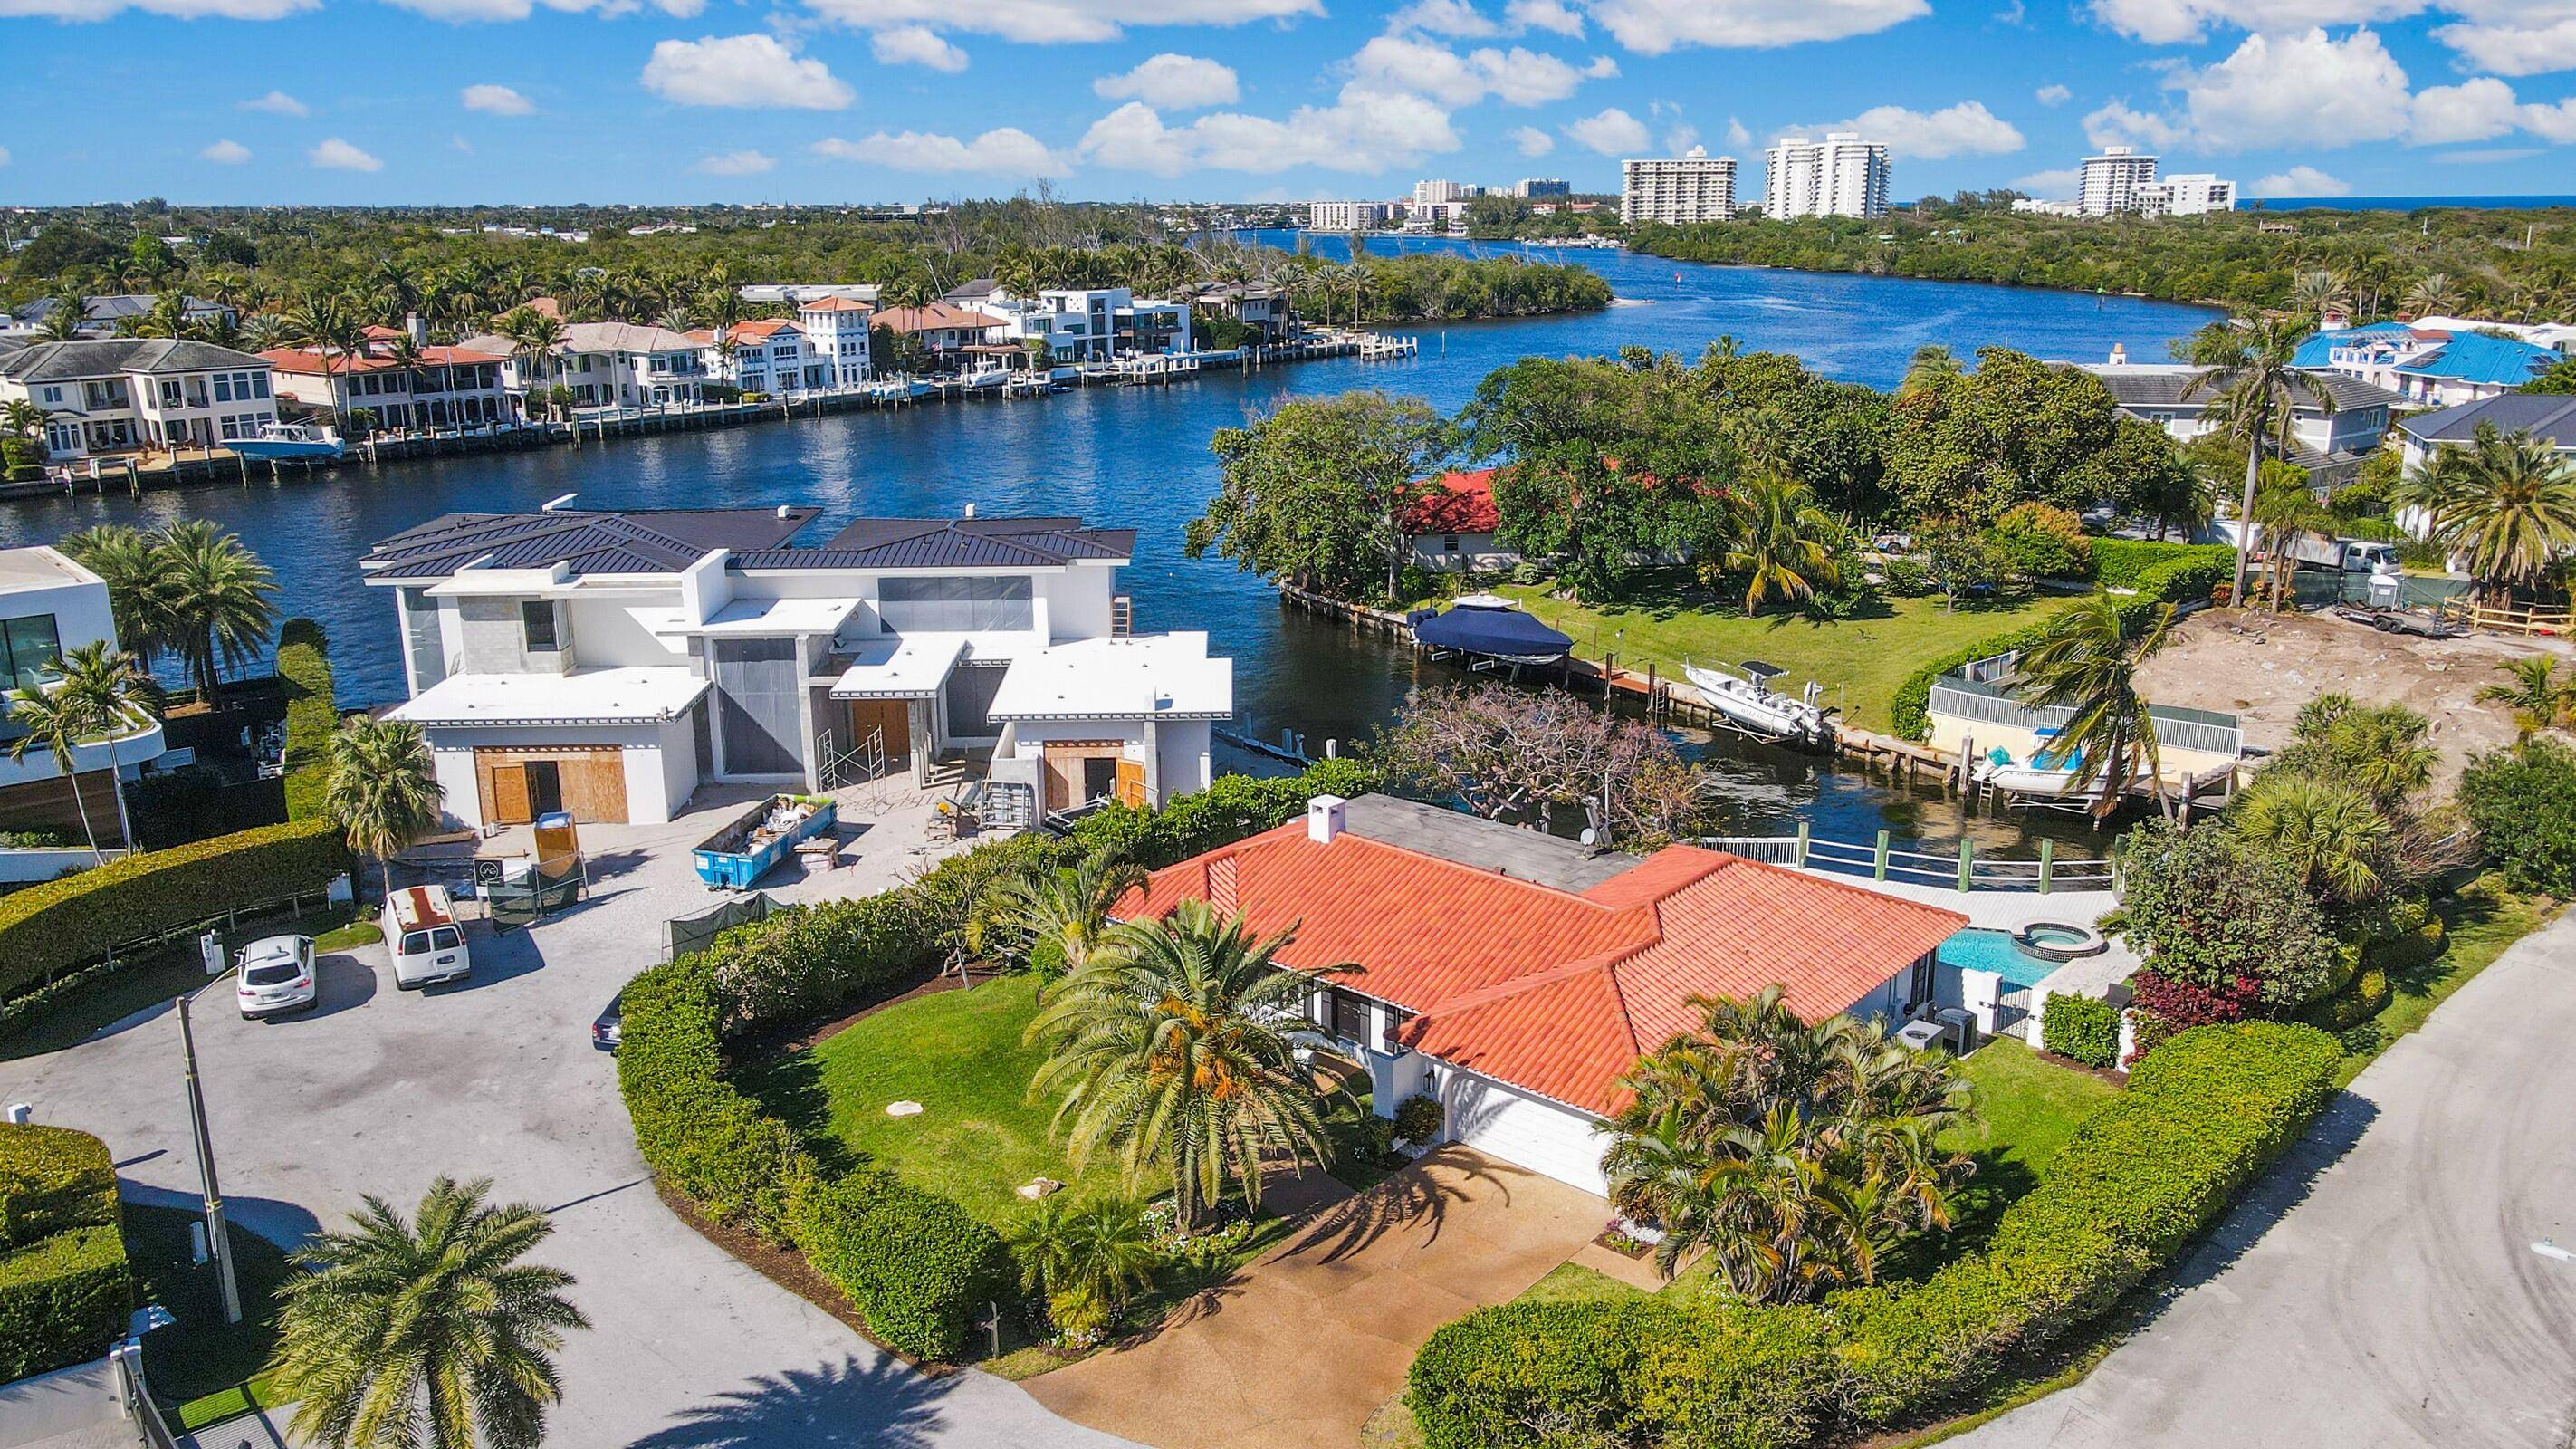 BEAUTIFUL UPDATED FULLY FURNISHED 3 BR 2BA WATERFRONT HOUSE IN DESIRABLE SUN SURF COMMUNITY BY THE BEACH AND MINUTES TO DOWNTOWN BOCA RATON WITH 120 FT OF SEAWALL AND A ...